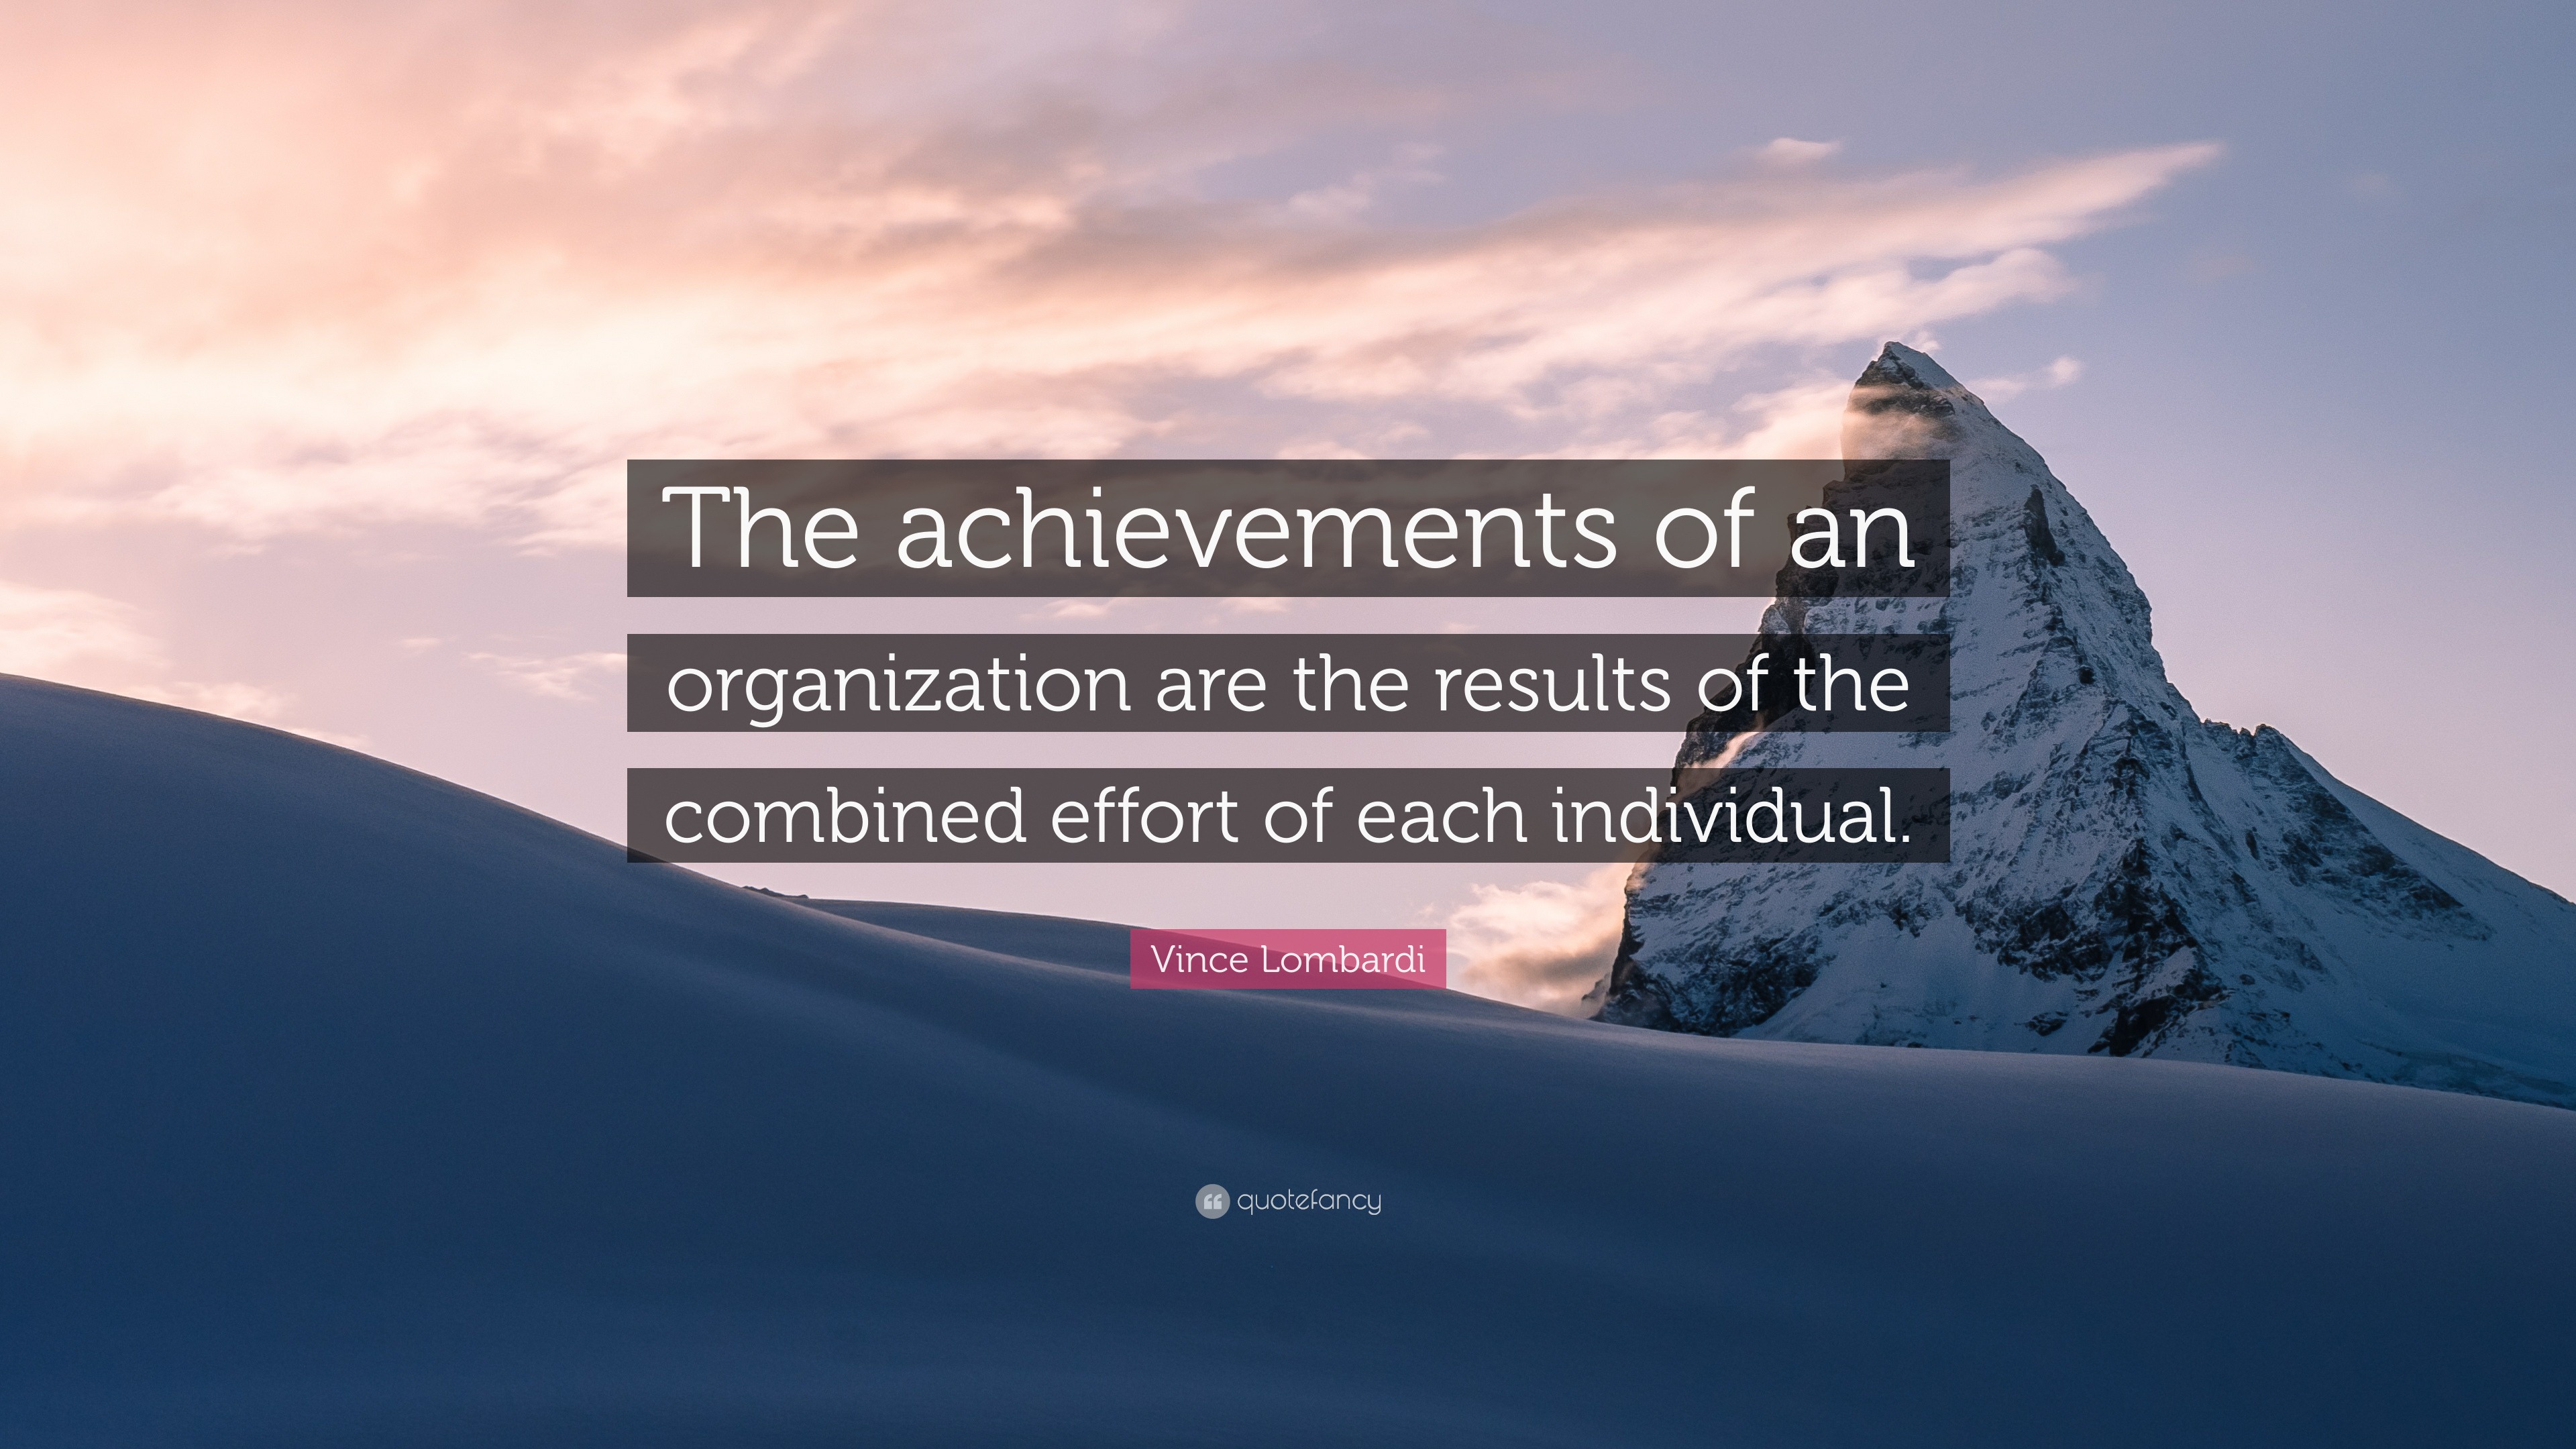 Vince Lombardi Quote: “The achievements of an organization are the